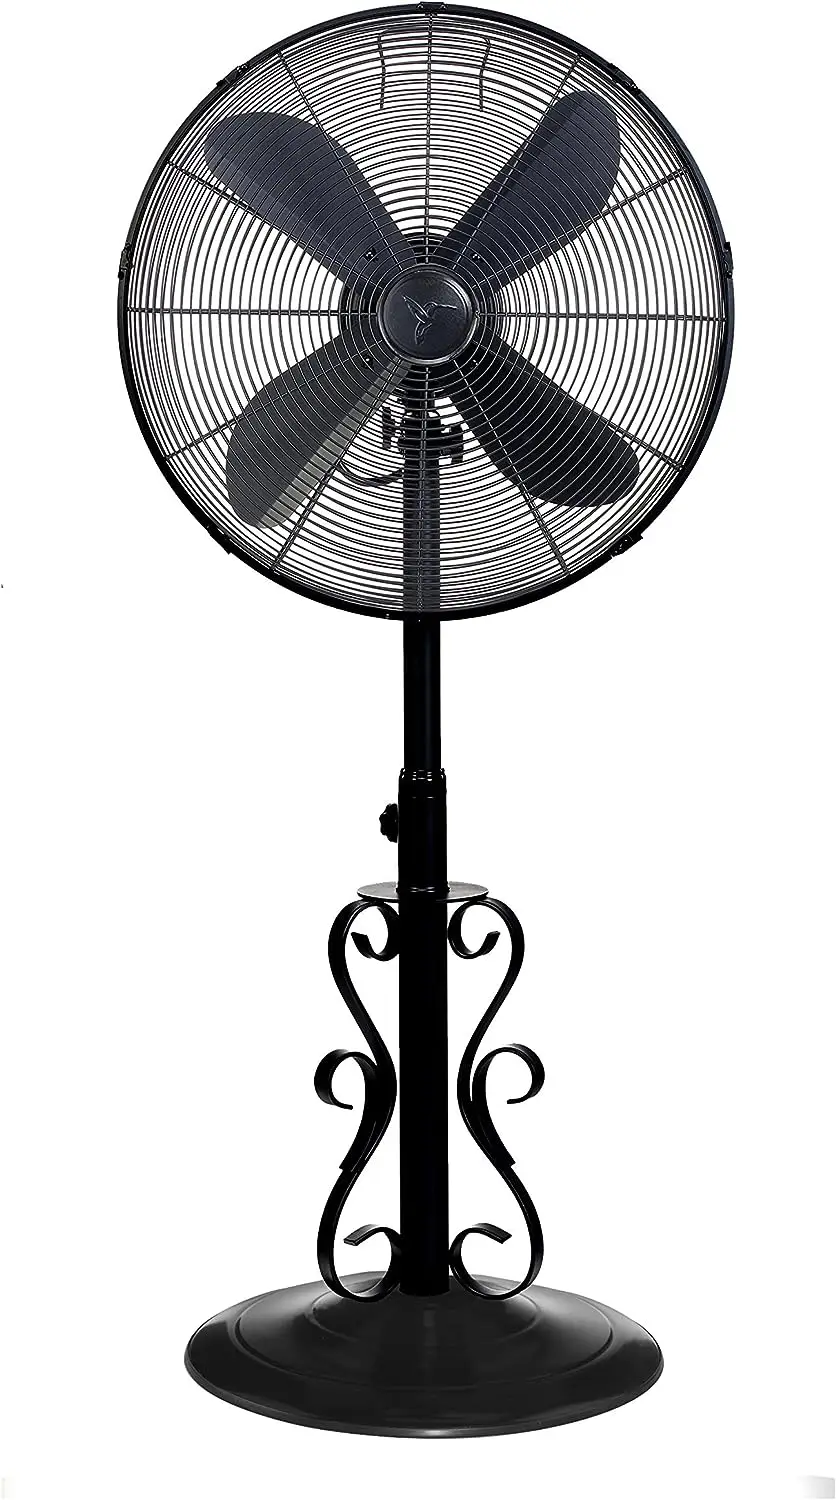 

Aire Oscillating Indoor Outdoor Standing Floor Fan for Cooling Your Area Fast - 3-Speeds, Adjustable 40-51 Inches in Height, Fit